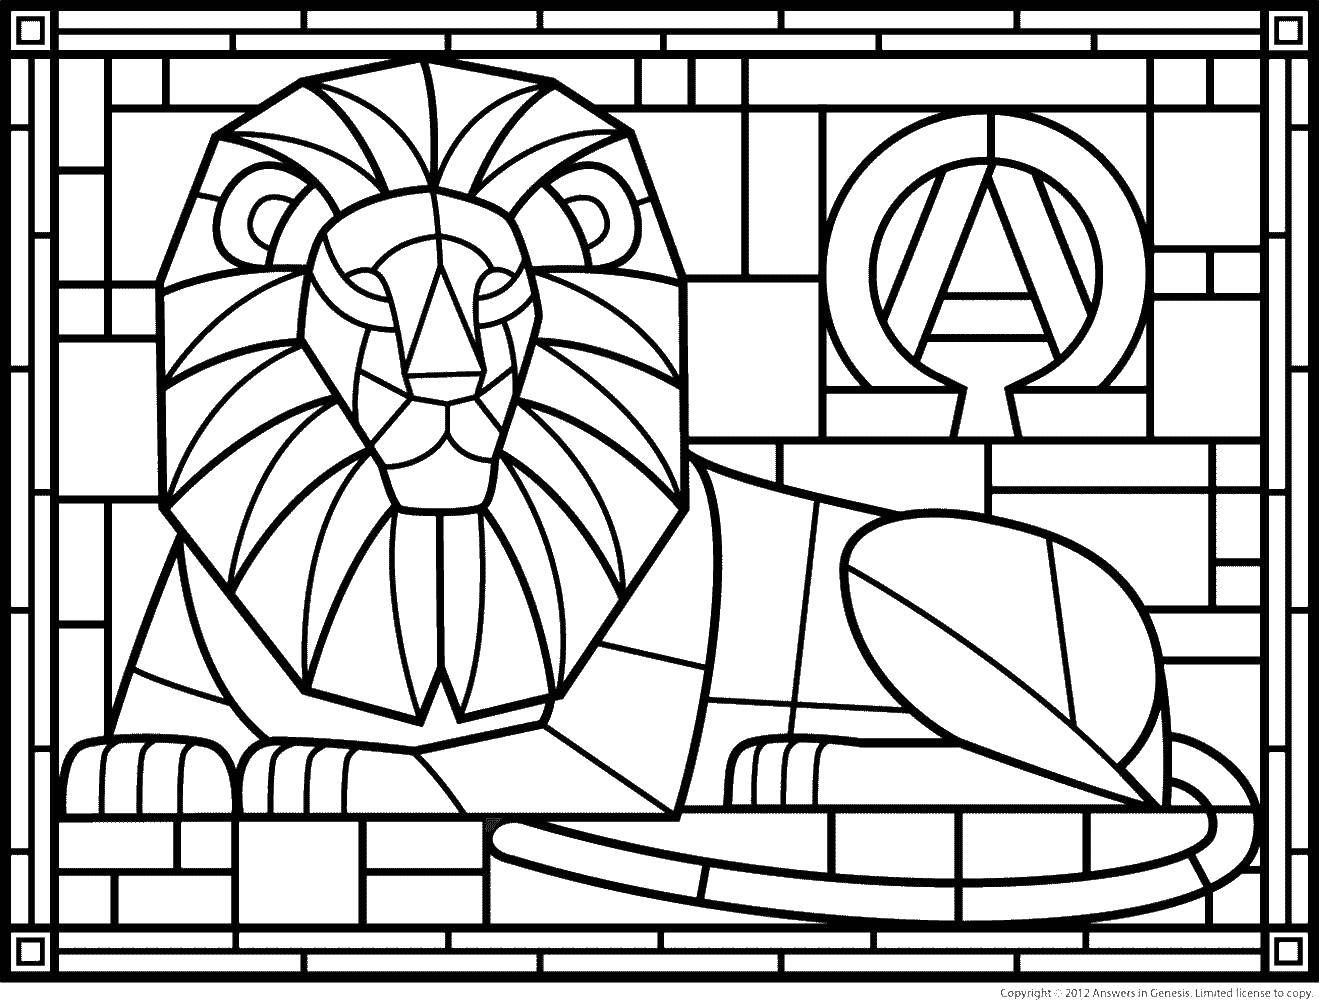 Coloring Patterns lion. Category patterns. Tags:  lion, patterns.